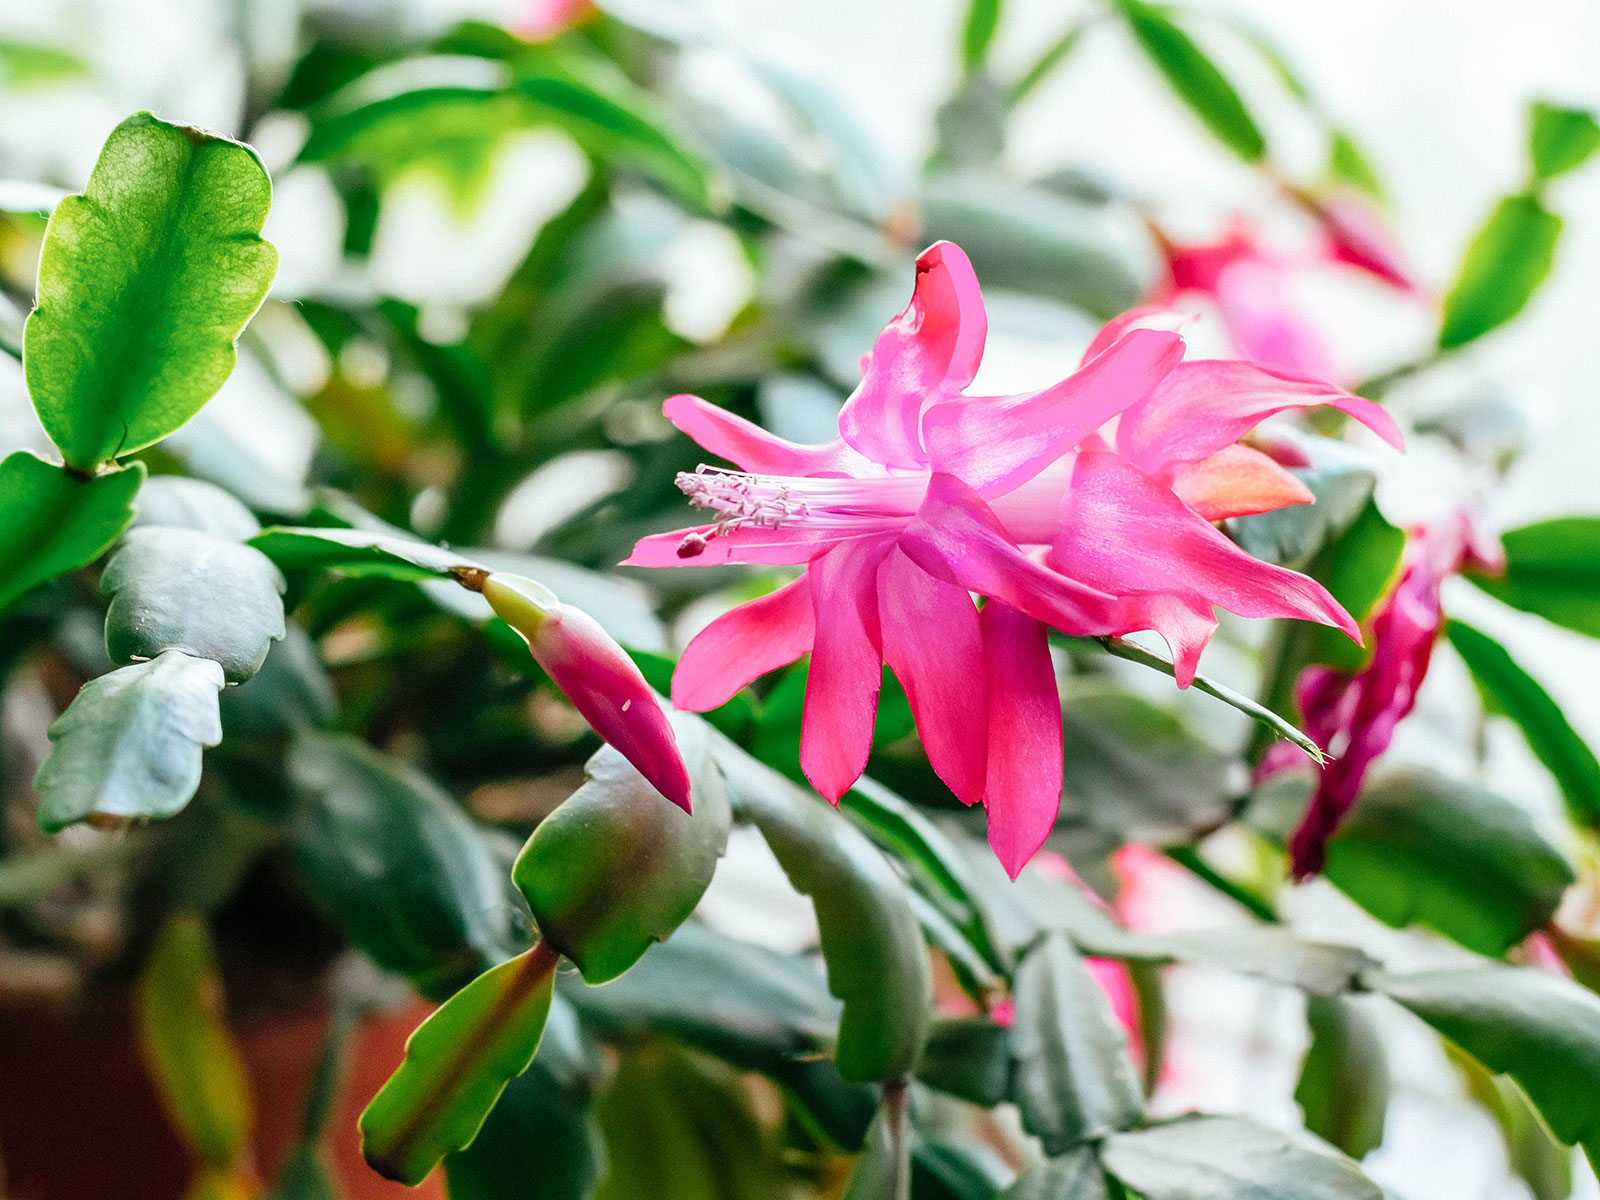 True Christmas cactus plant with rounded leaf segments and pink flowers